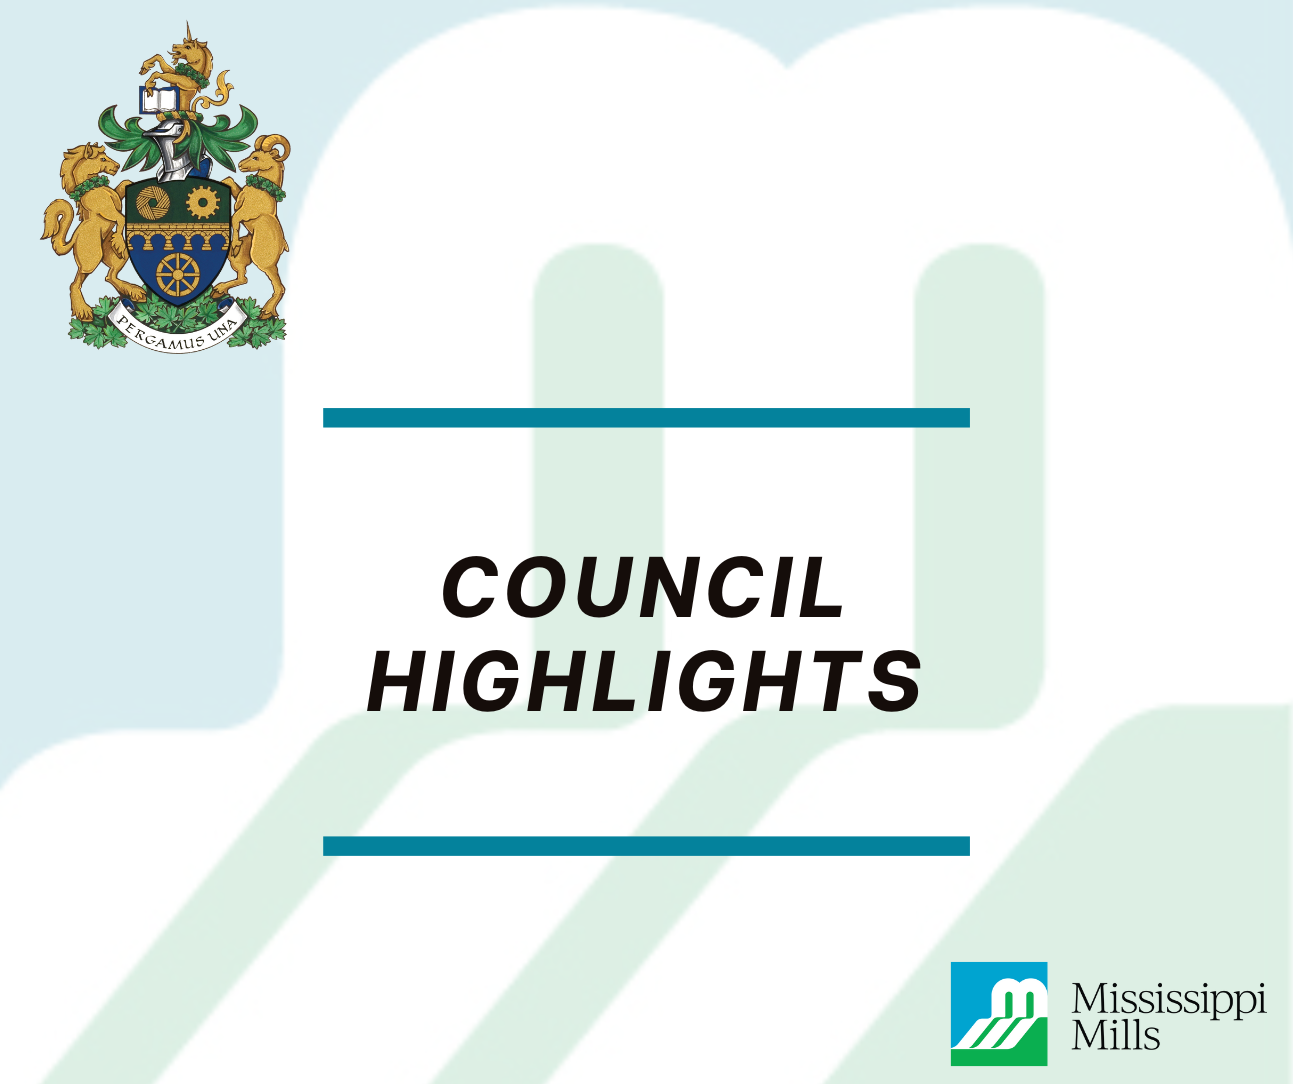 Green, blue and white graphic with text 'Council Highlights'